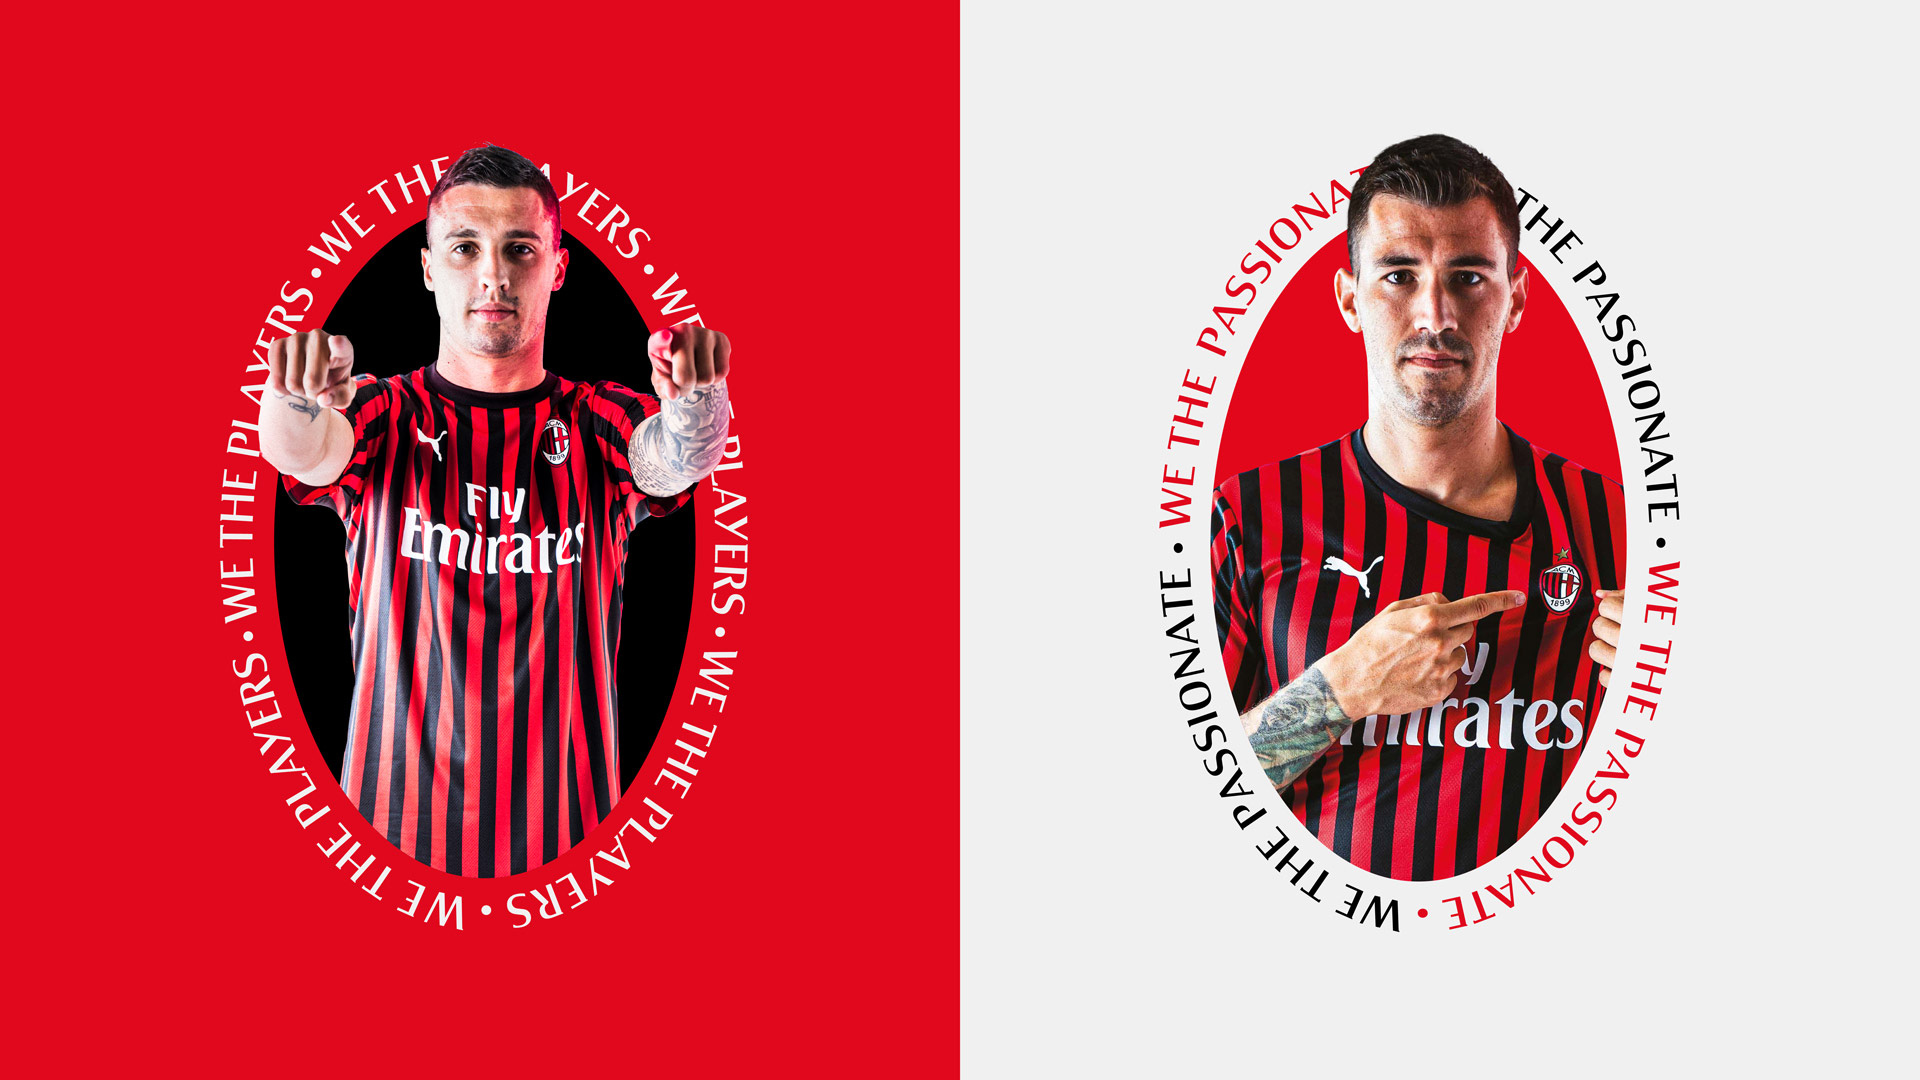 New Identity for A.C. Milan by DixonBaxi